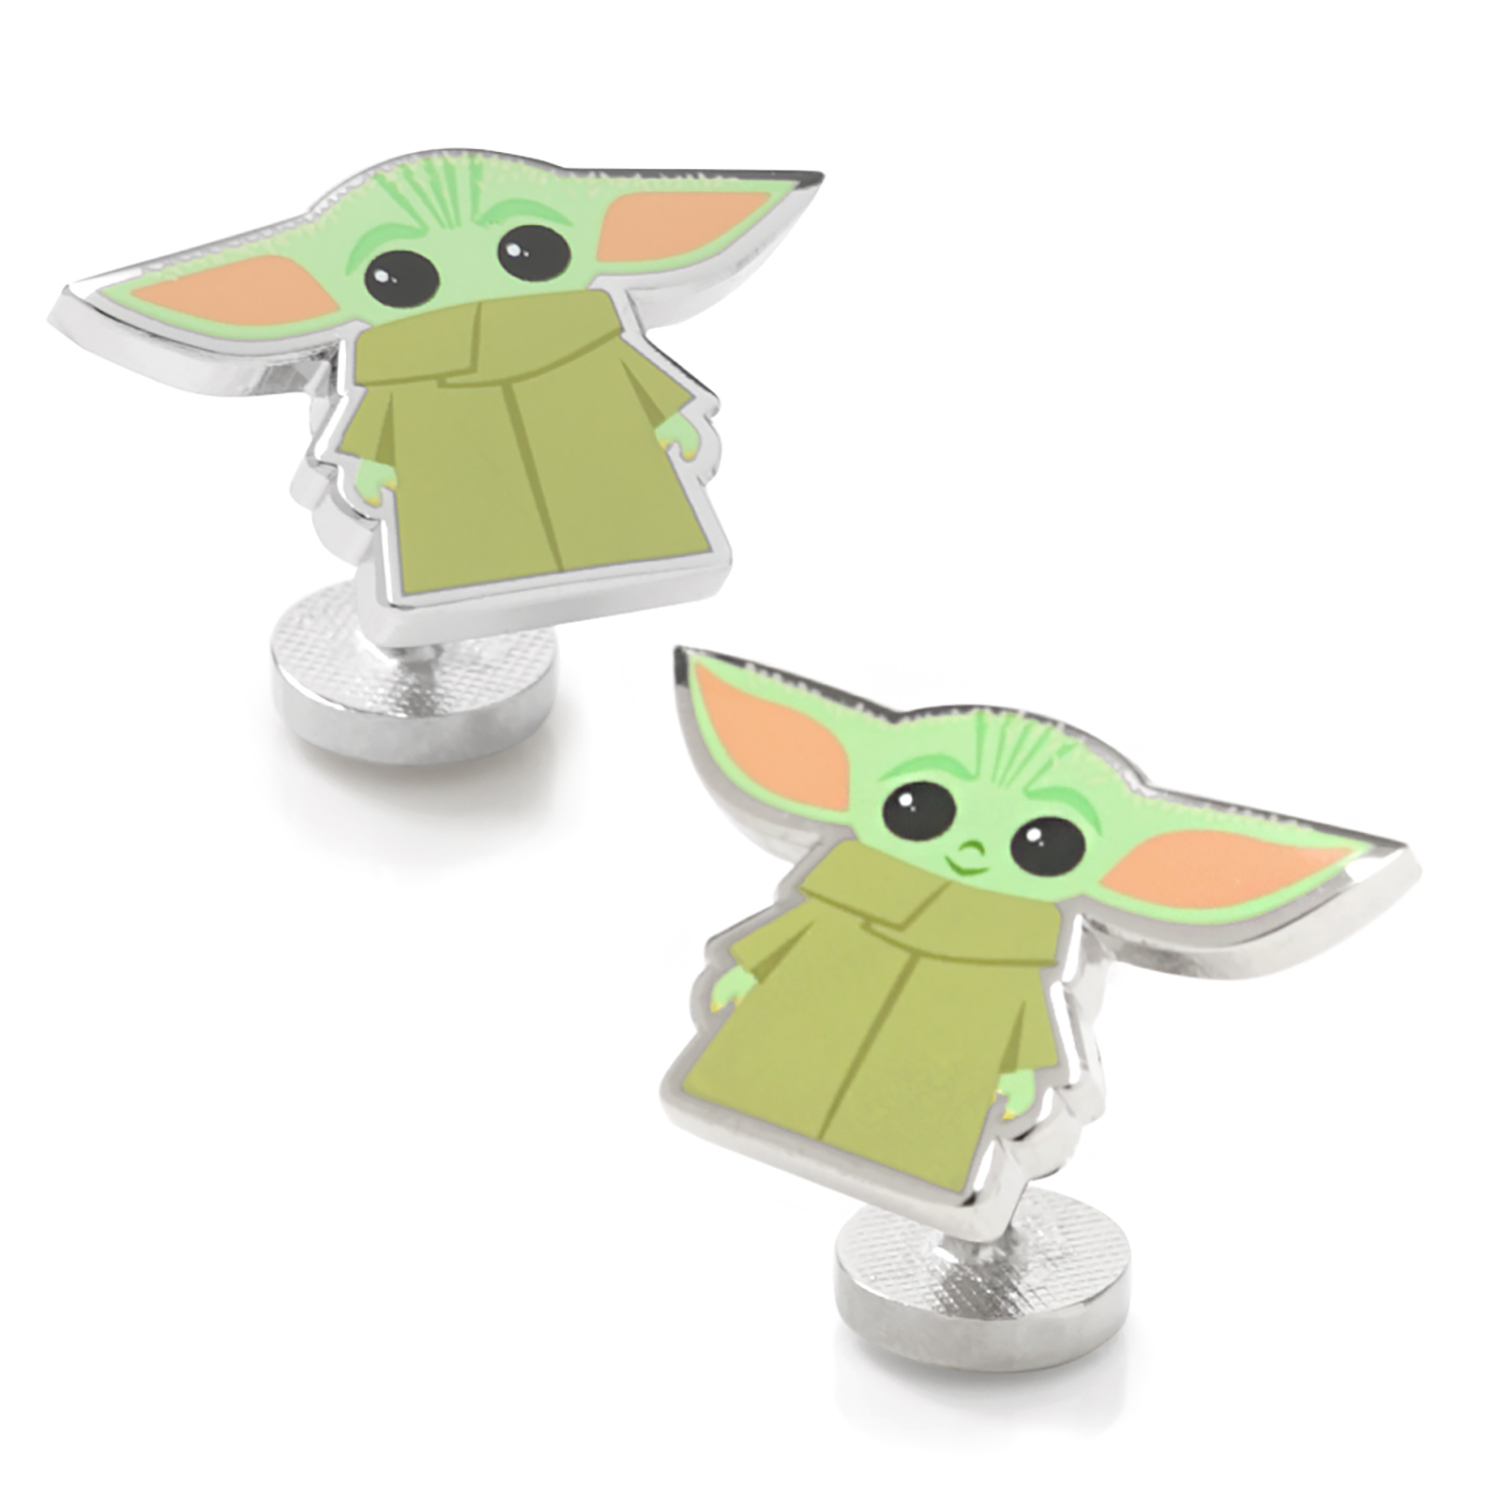 The Child Star Wars Baby Yoda Cufflinks Cufflinks Depot Grogu was born in the year 41 bby, and was raised at the jedi temple on coruscant. the child star wars baby yoda cufflinks